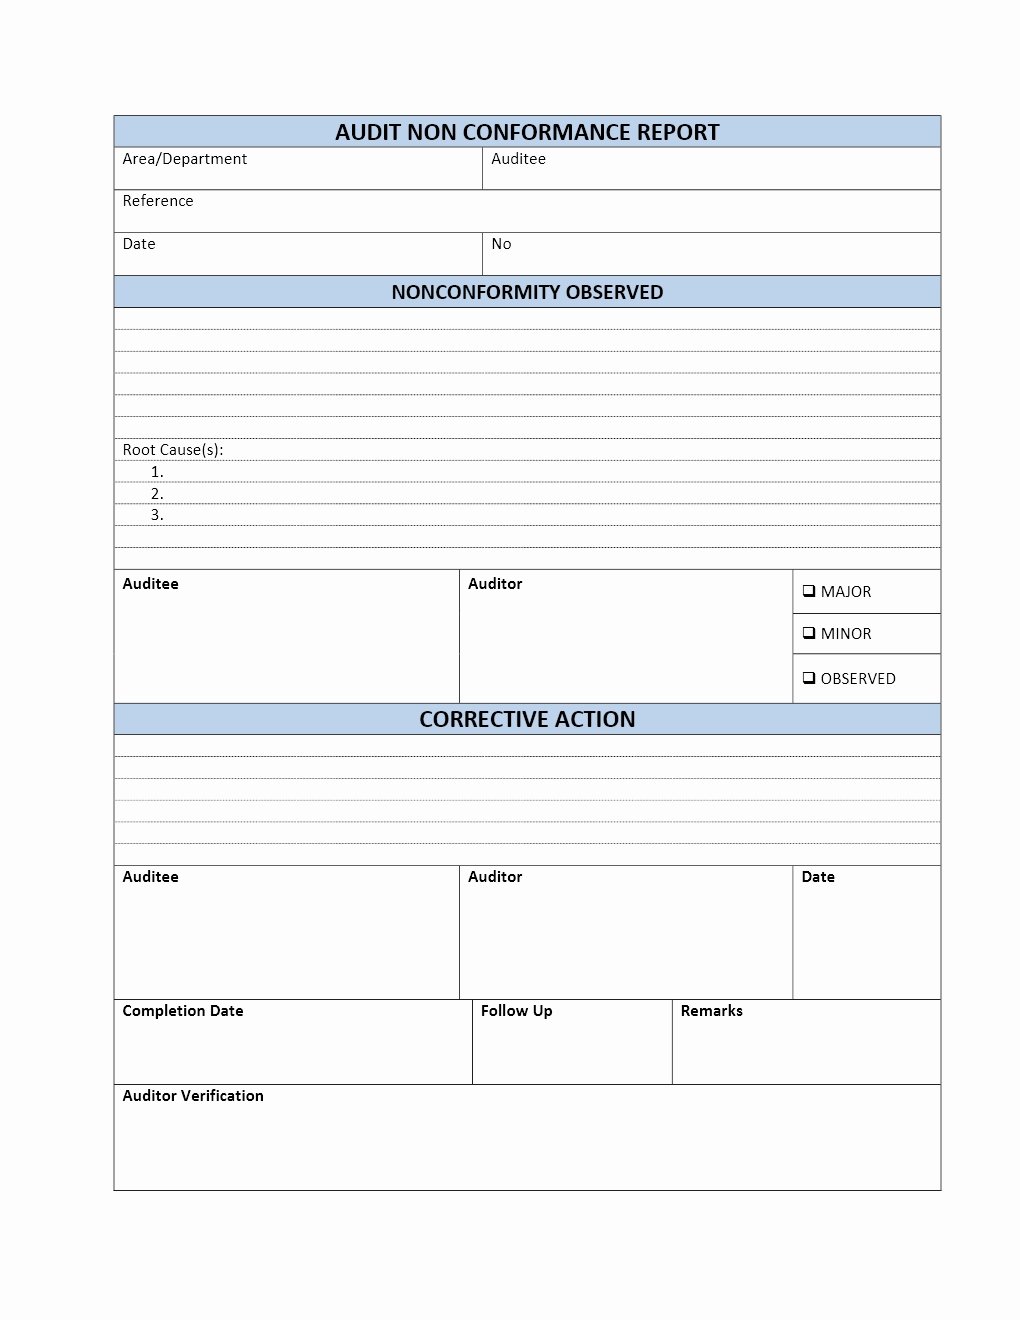 Compliance Audit Report Template Best Of Free Microsoft Word Templates Part 2